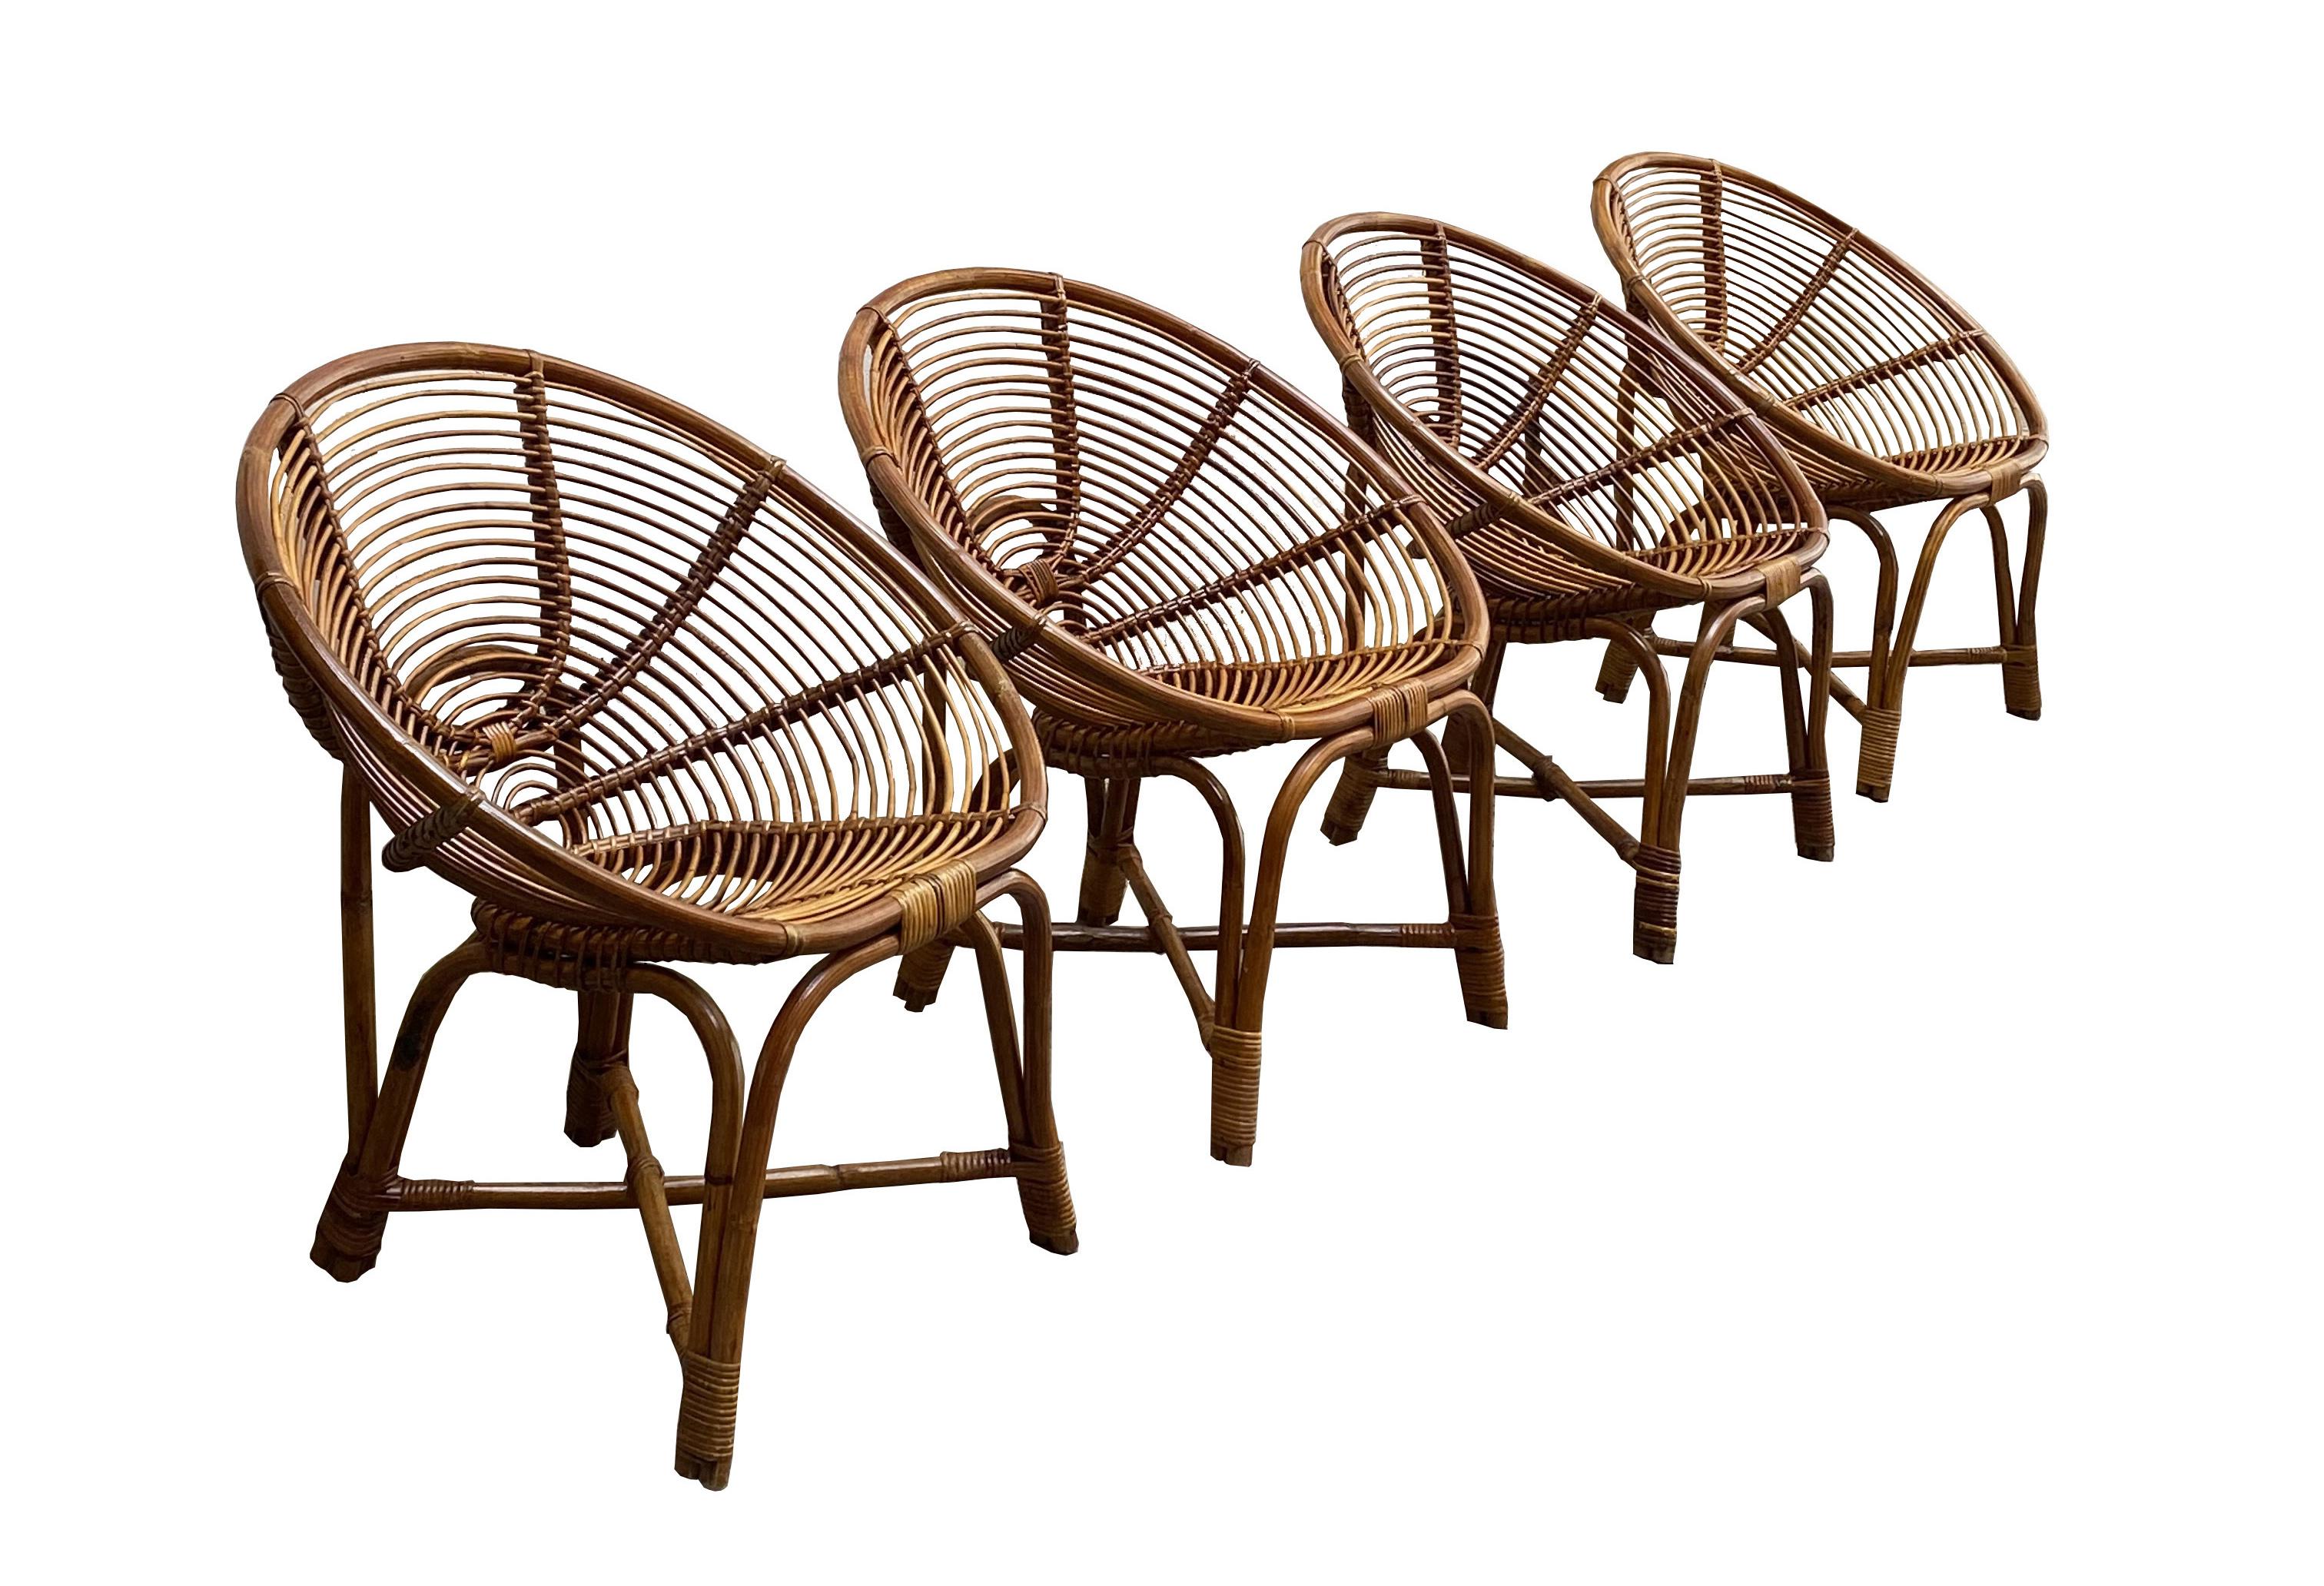 Set of 4 armchairs made of cane and bamboo and a round coffee table with cane and bamboo frame and glass top. Italian production 1960
Armchair size cm. H.72X70X50
Coffee table size cm.. H.50X67X67